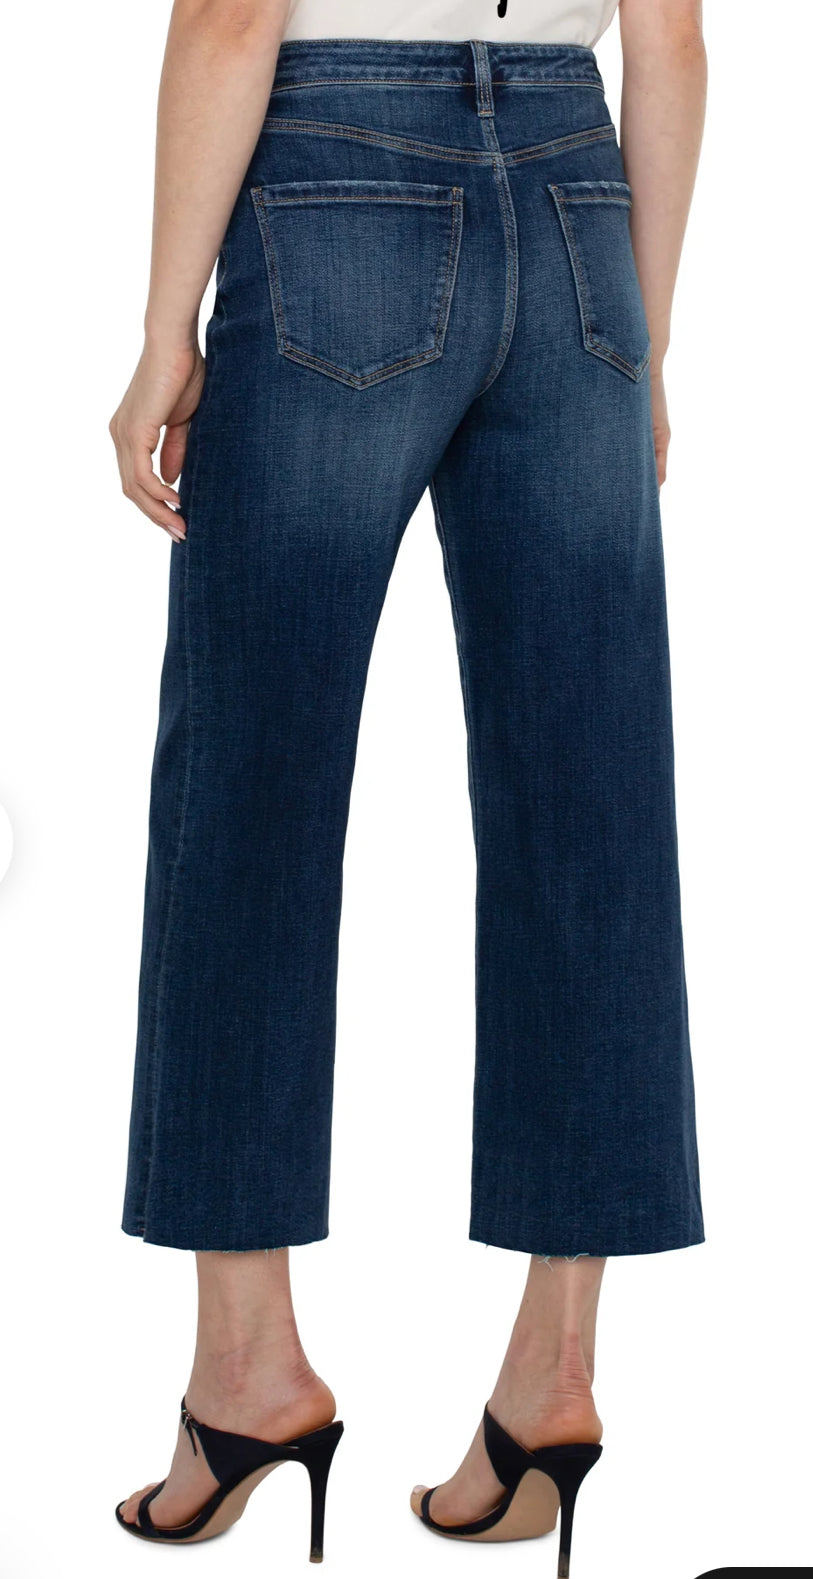 The Stride Jeans